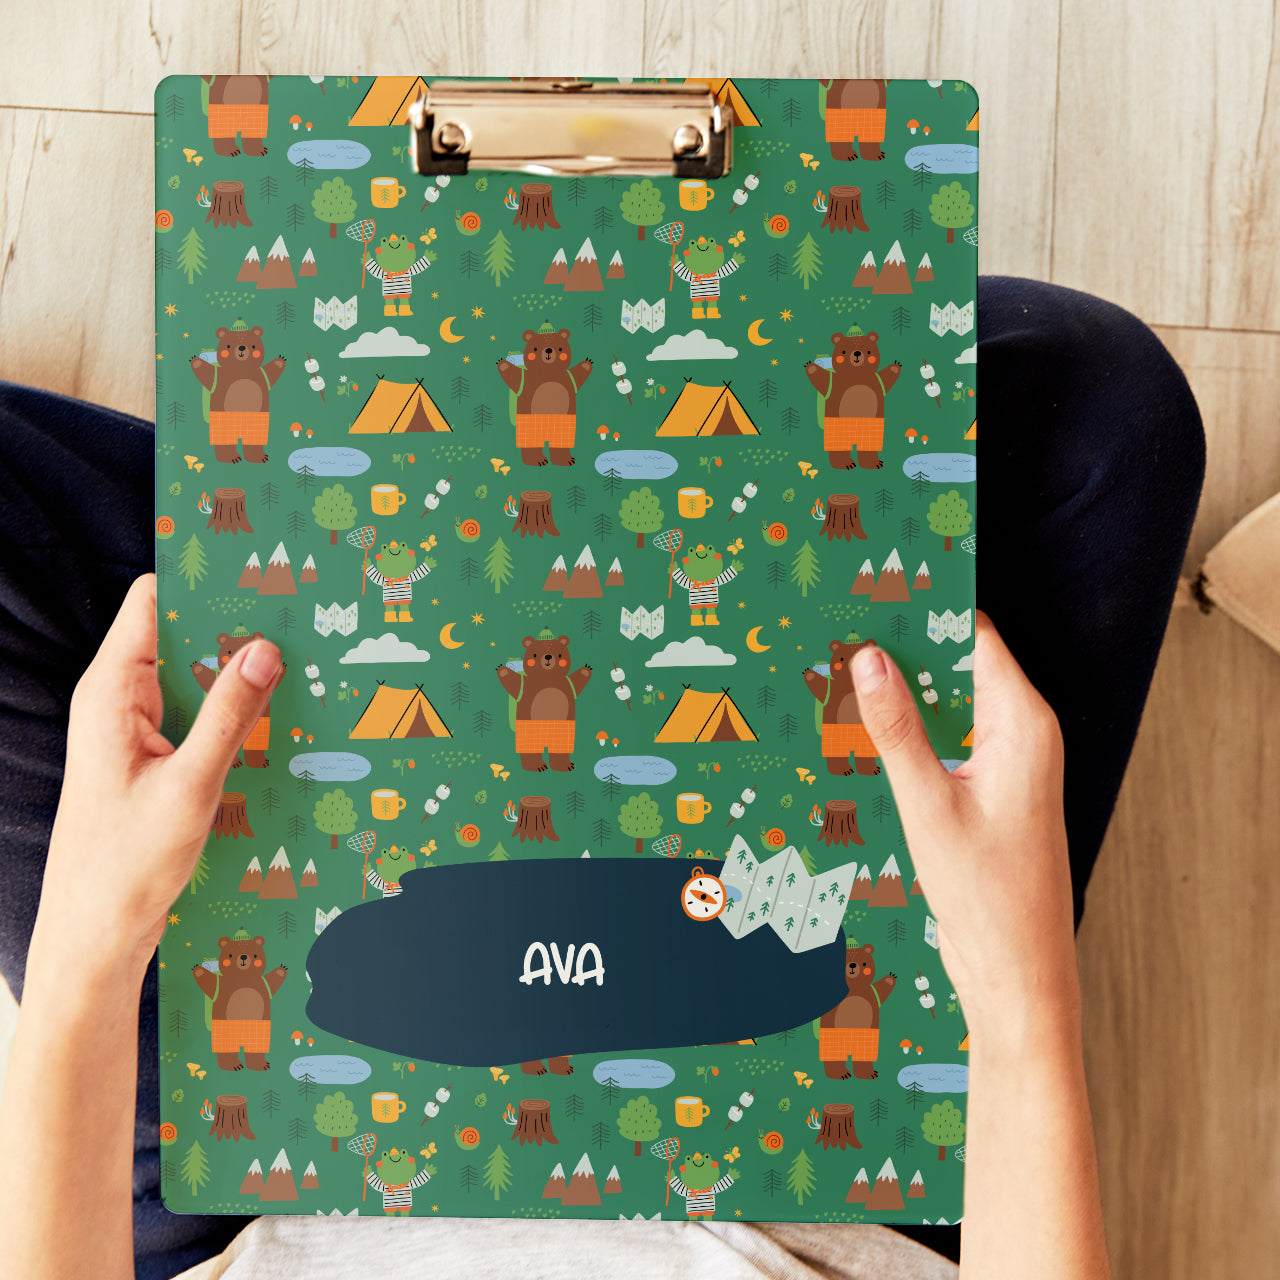 Personalised Clipboard - Into The Wild